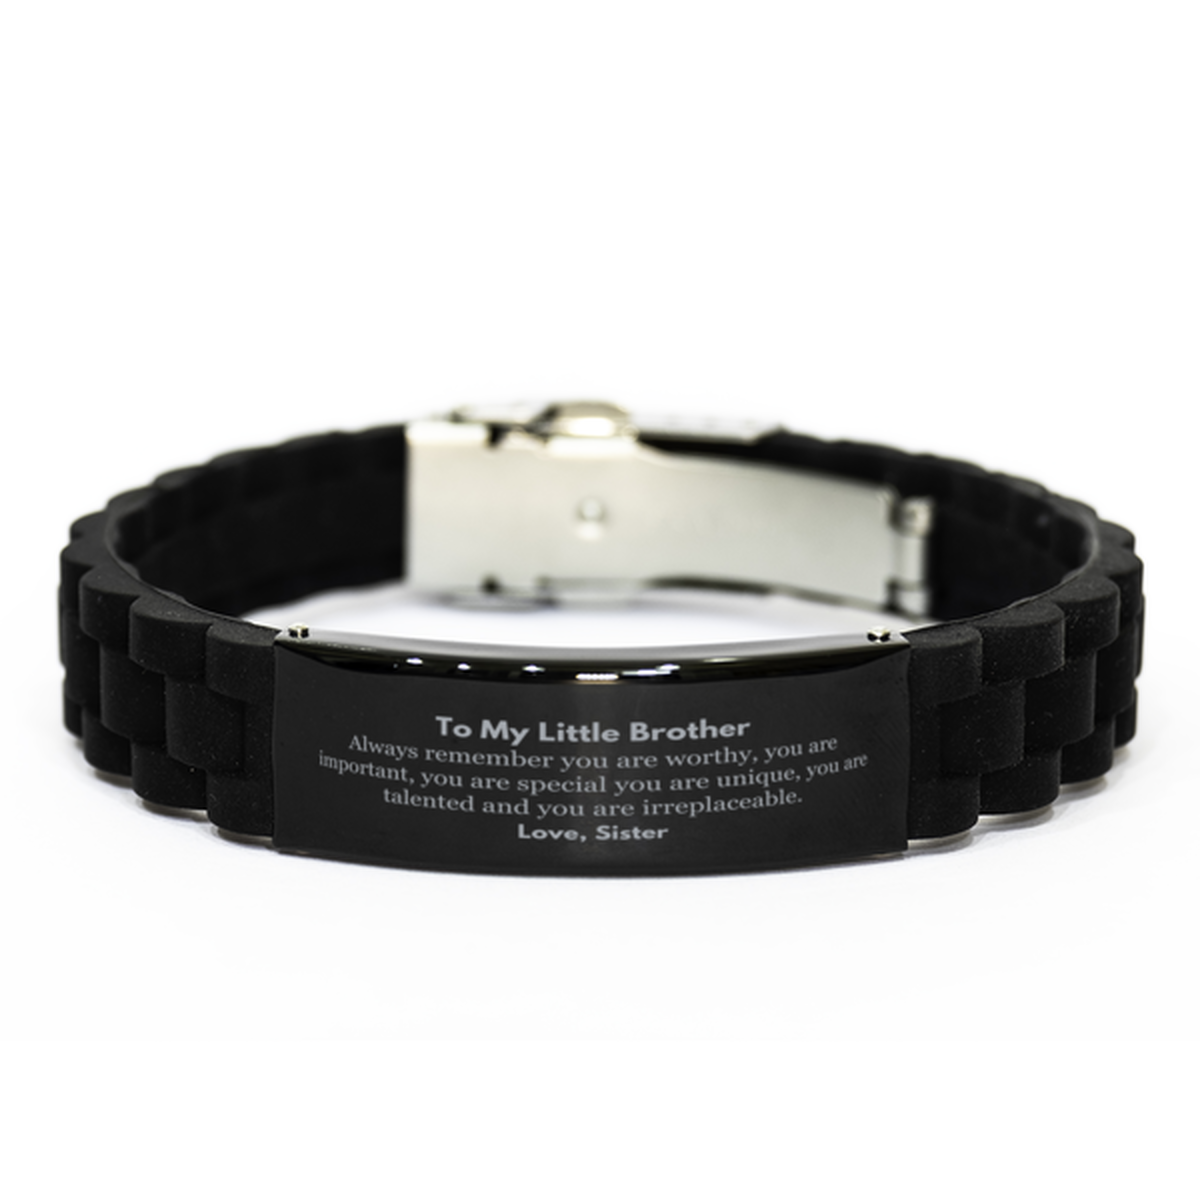 Little Brother Birthday Gifts from Sister, Inspirational Black Glidelock Clasp Bracelet for Little Brother Christmas Graduation Gifts for Little Brother Always remember you are worthy, you are important. Love, Sister